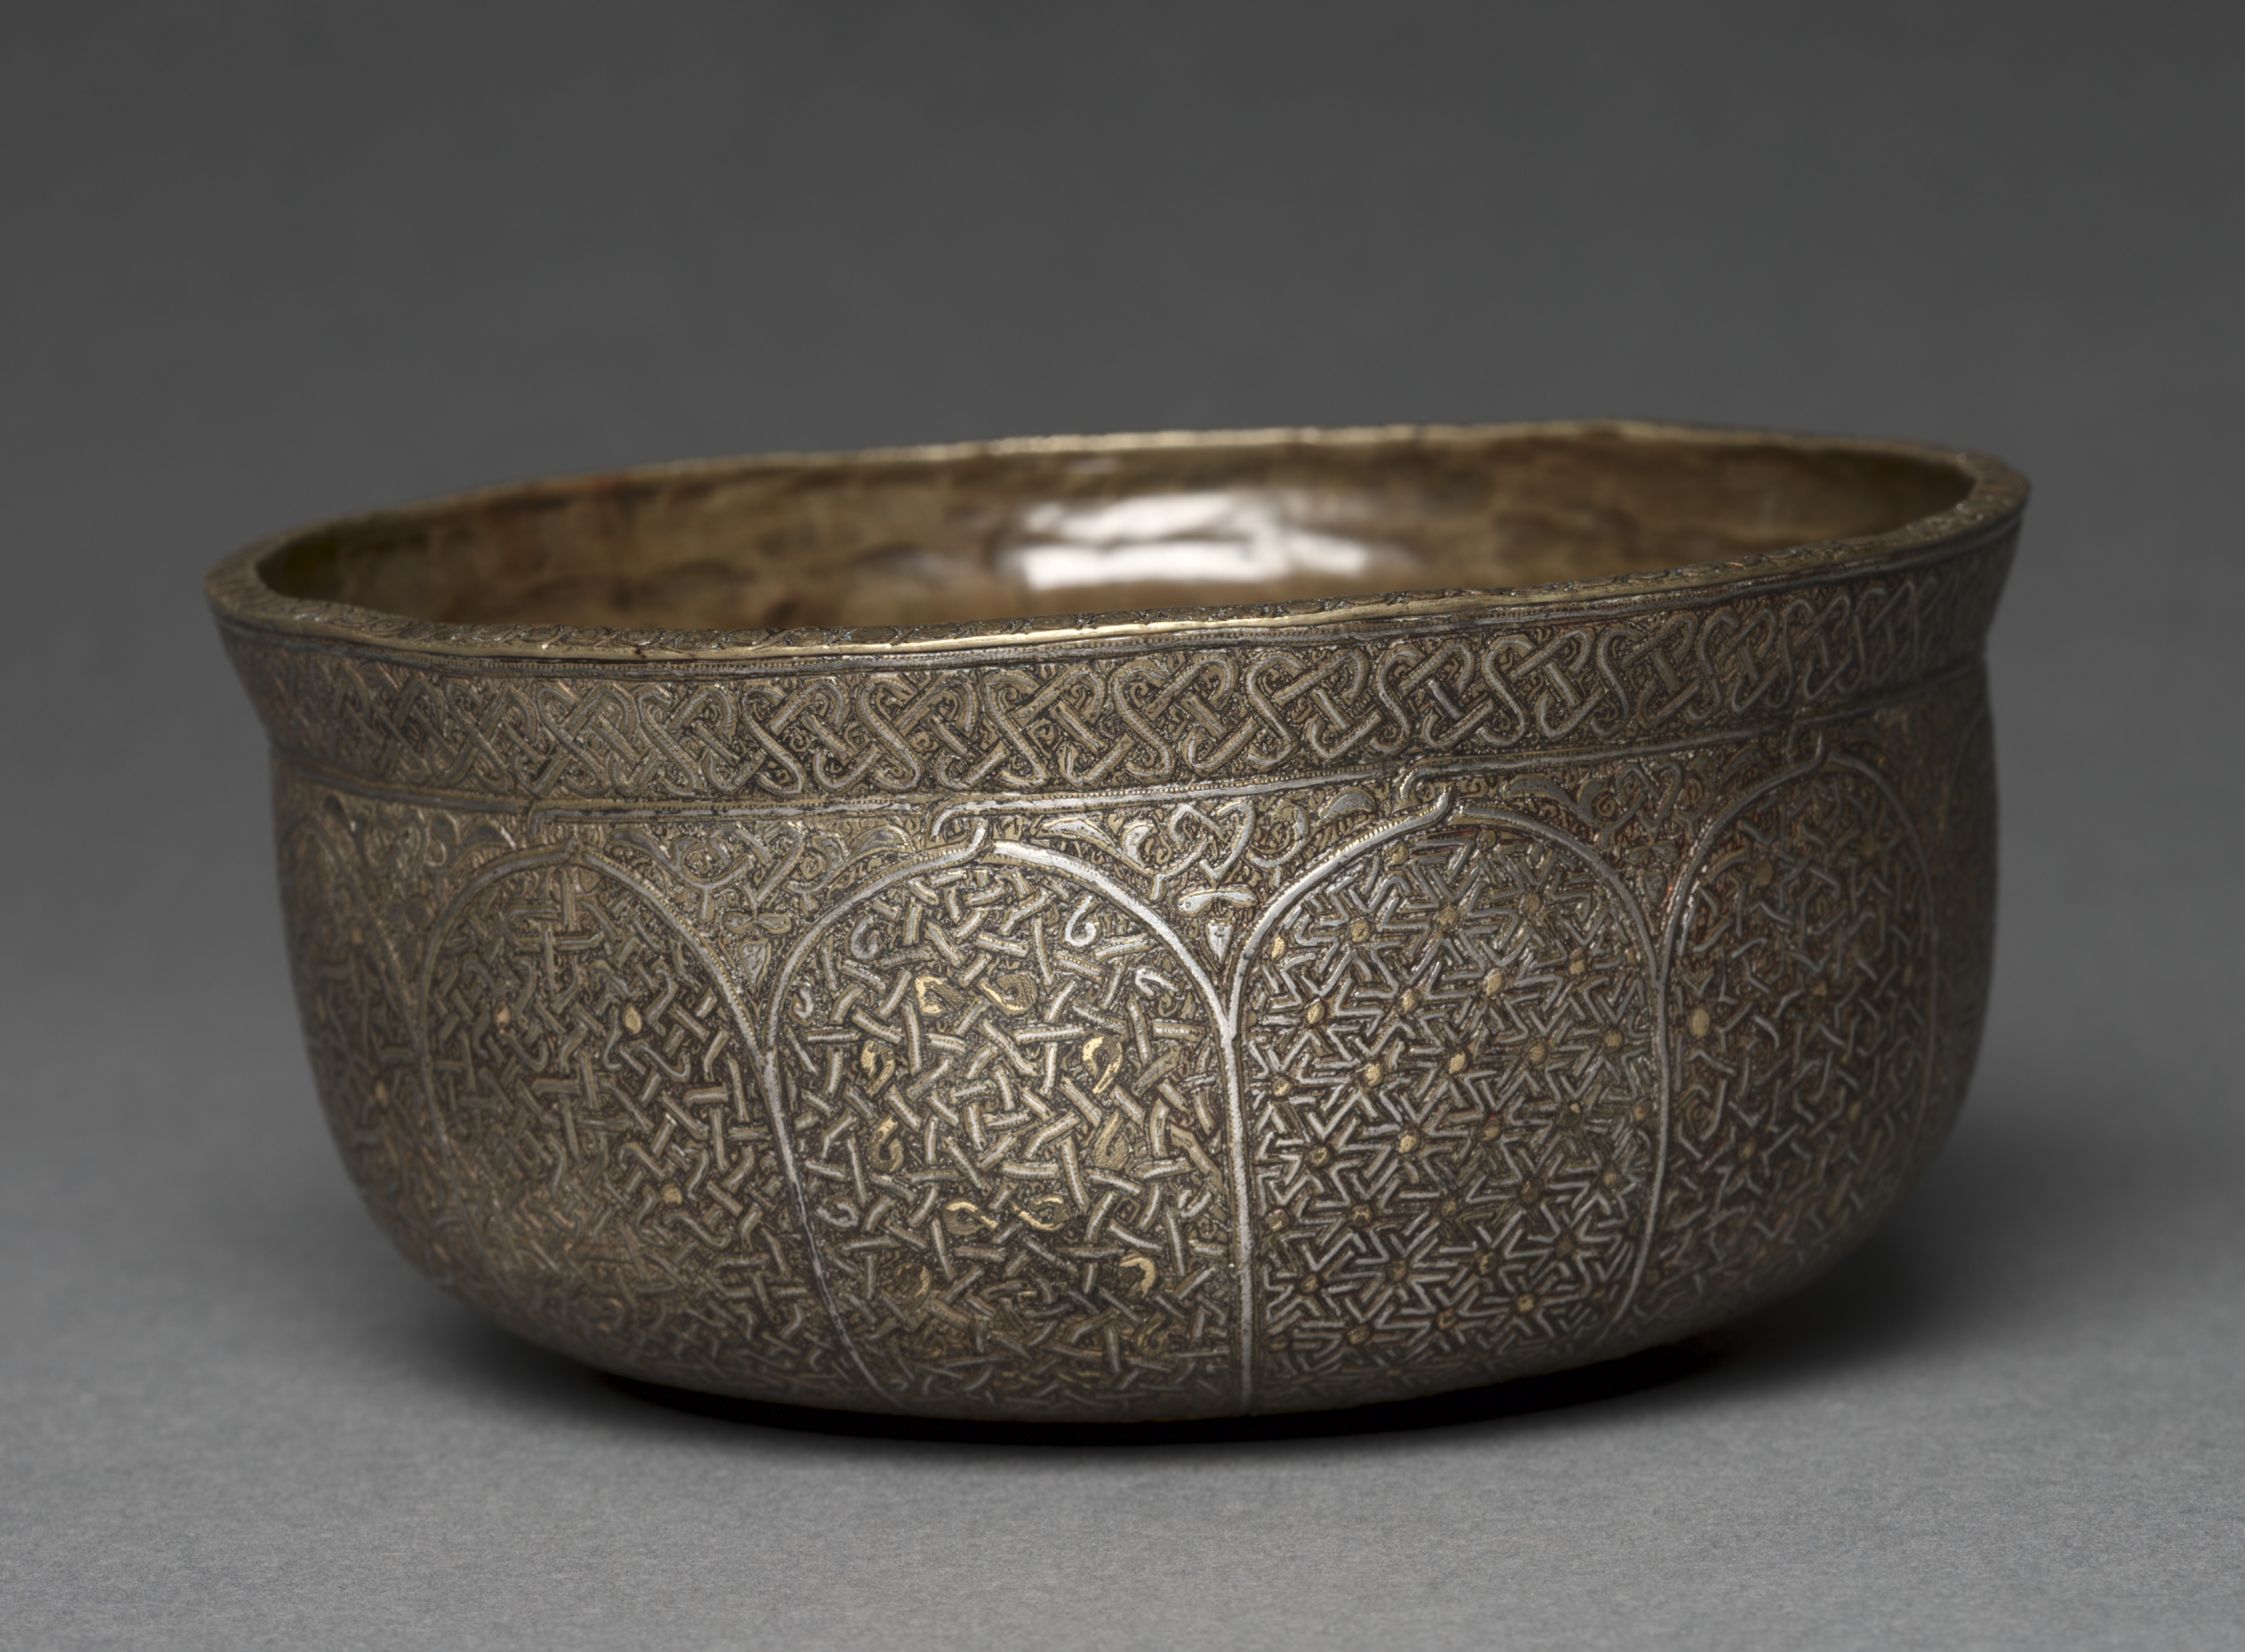 Bowl with Geometric Designs